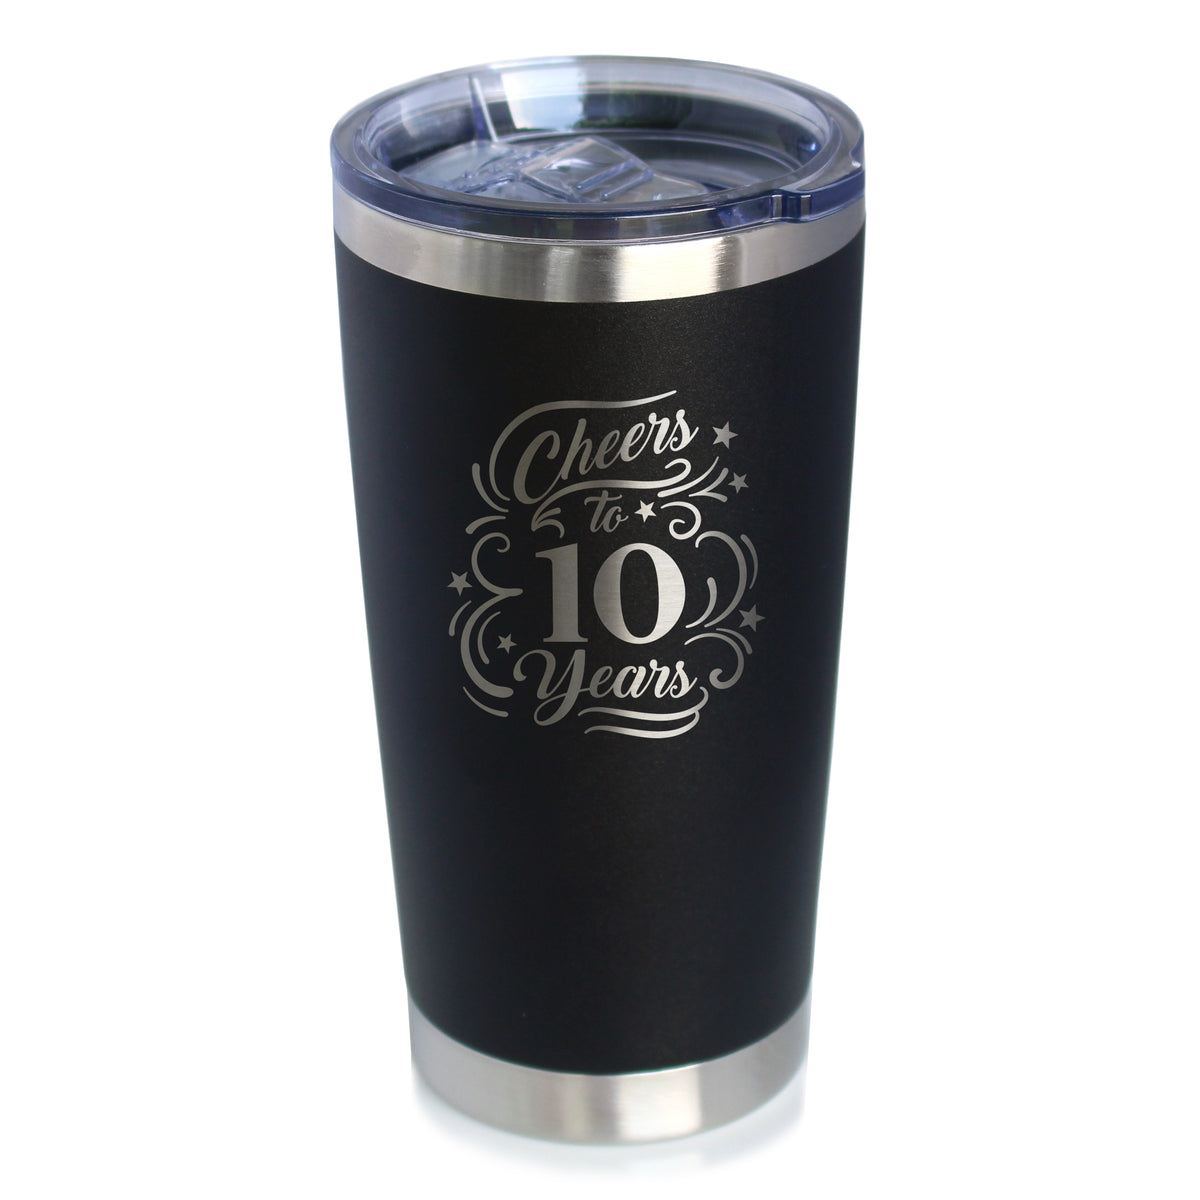 Cheers to 10 Years - Insulated Coffee Tumbler Cup with Sliding Lid - Stainless Steel Insulated Mug - 10th Anniversary Gifts and Party Decor